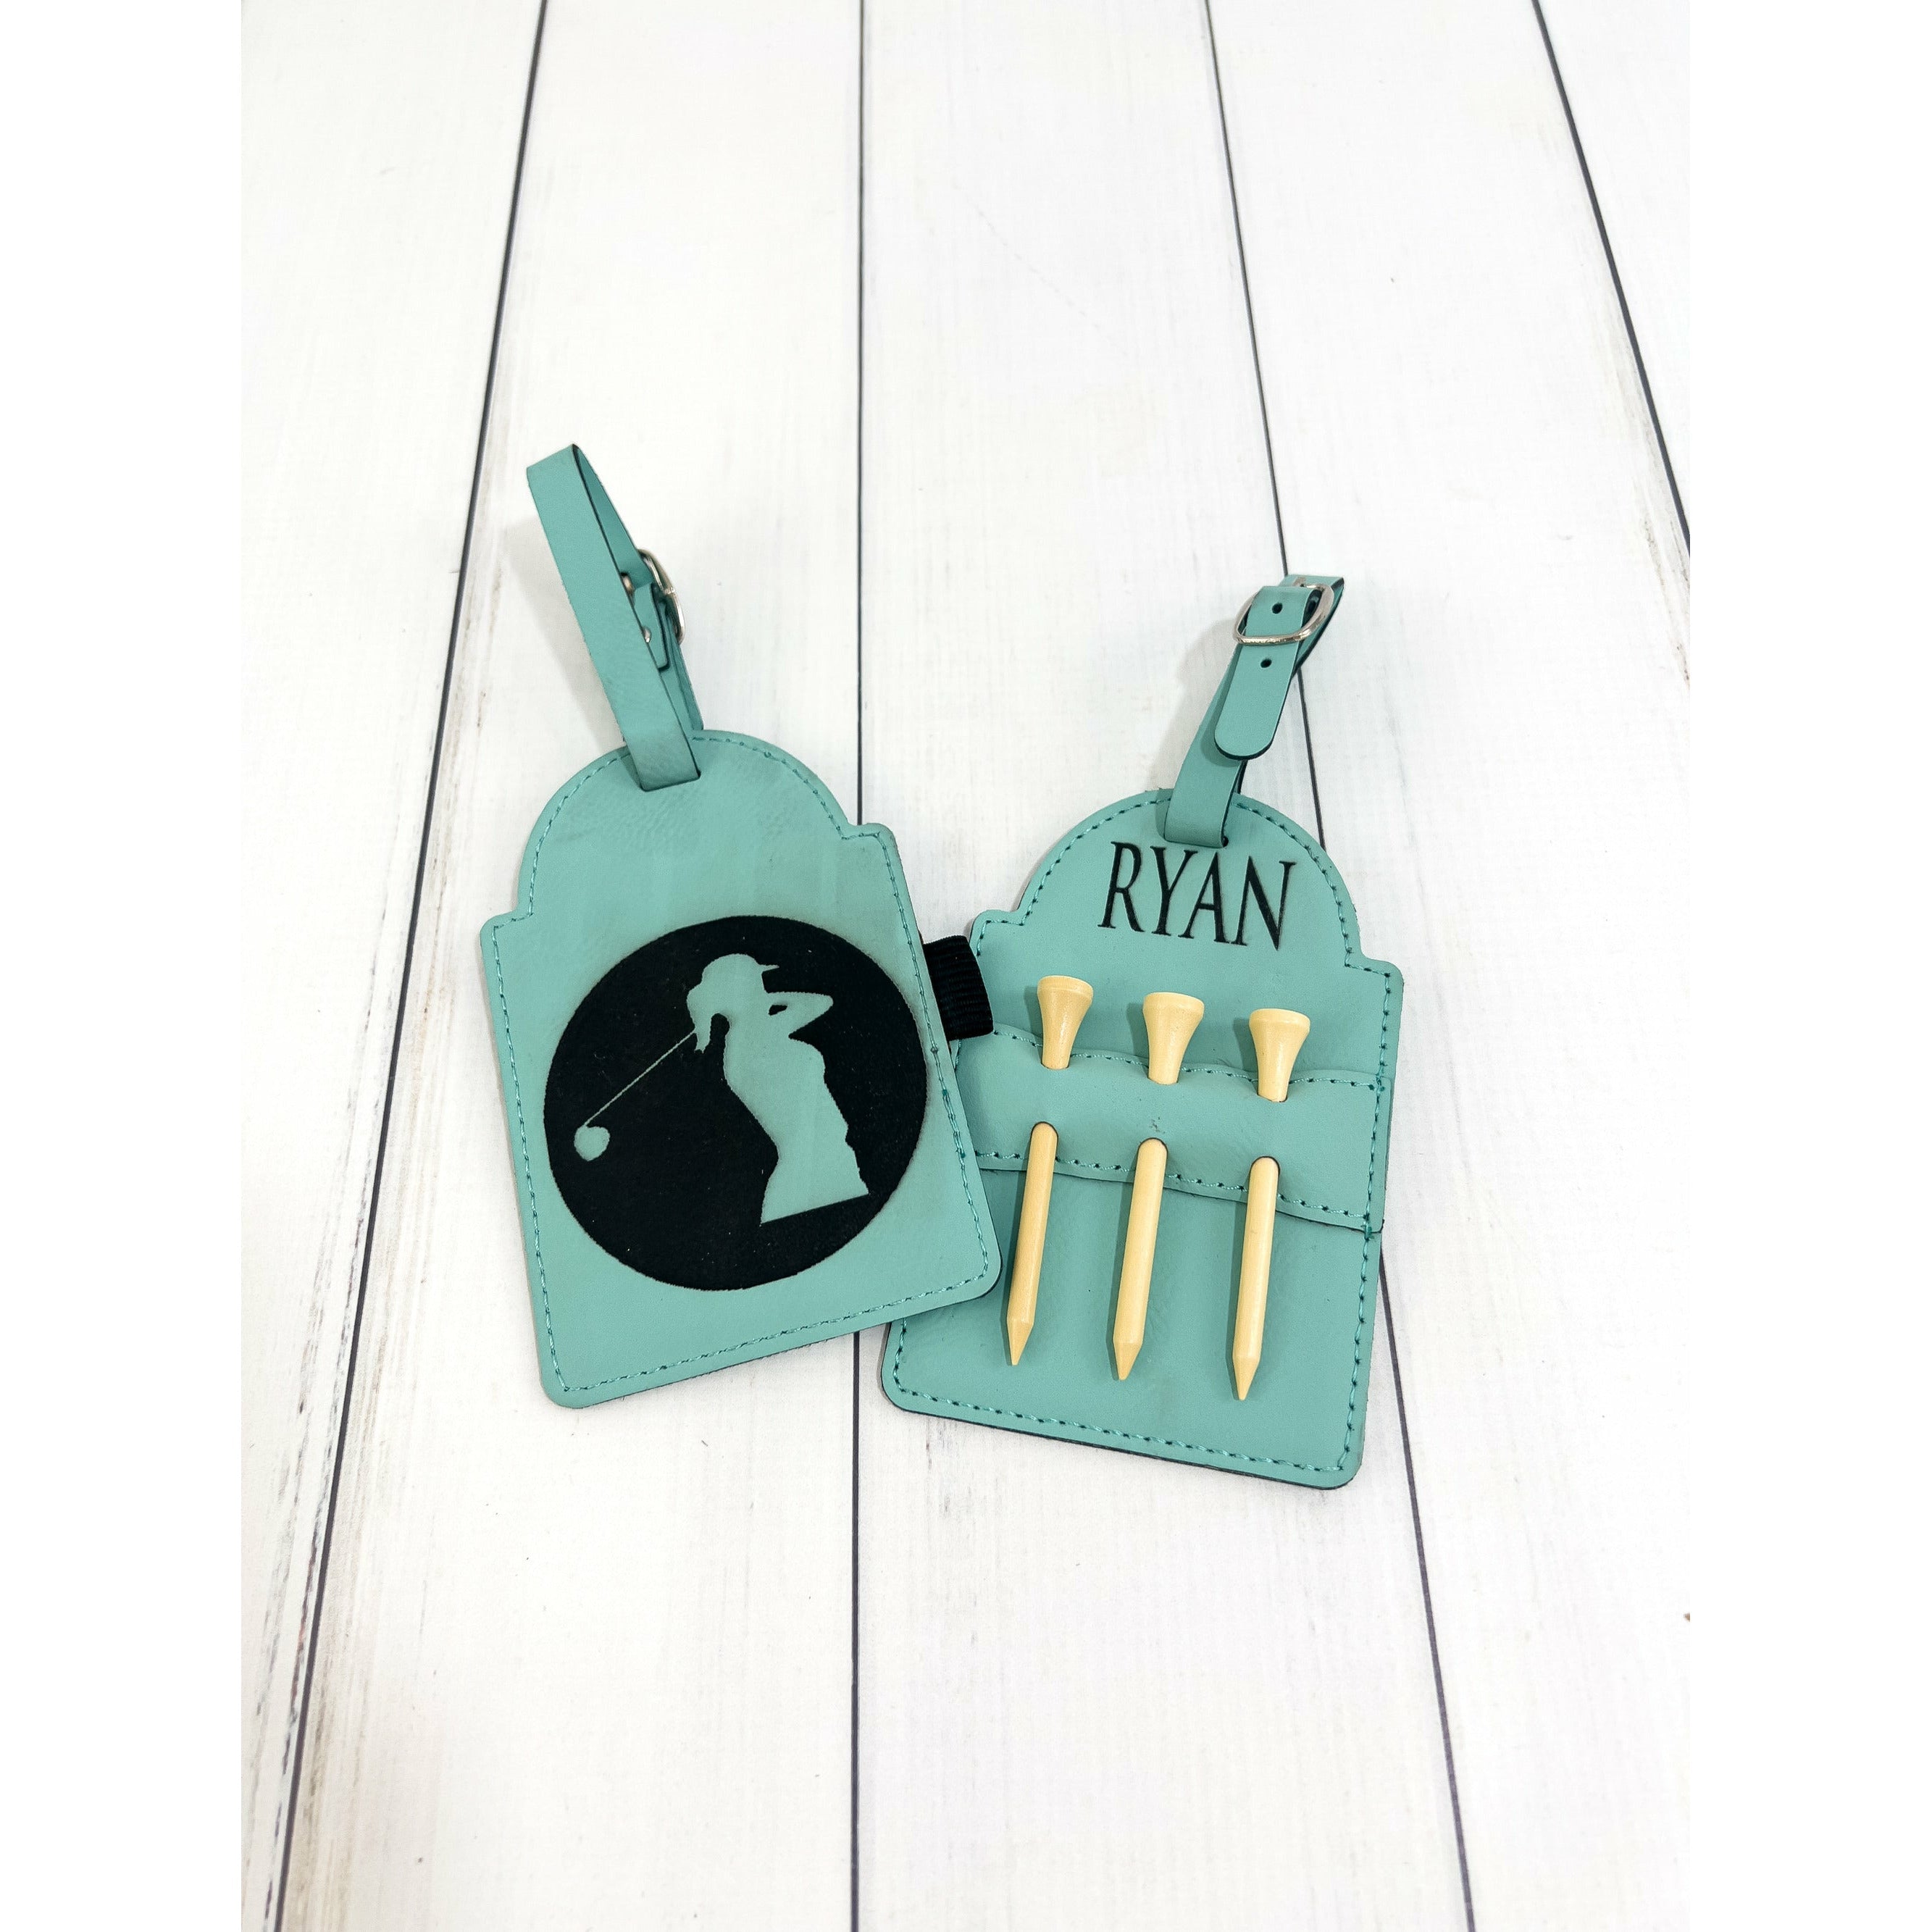 Personalized Golf Bag Tag